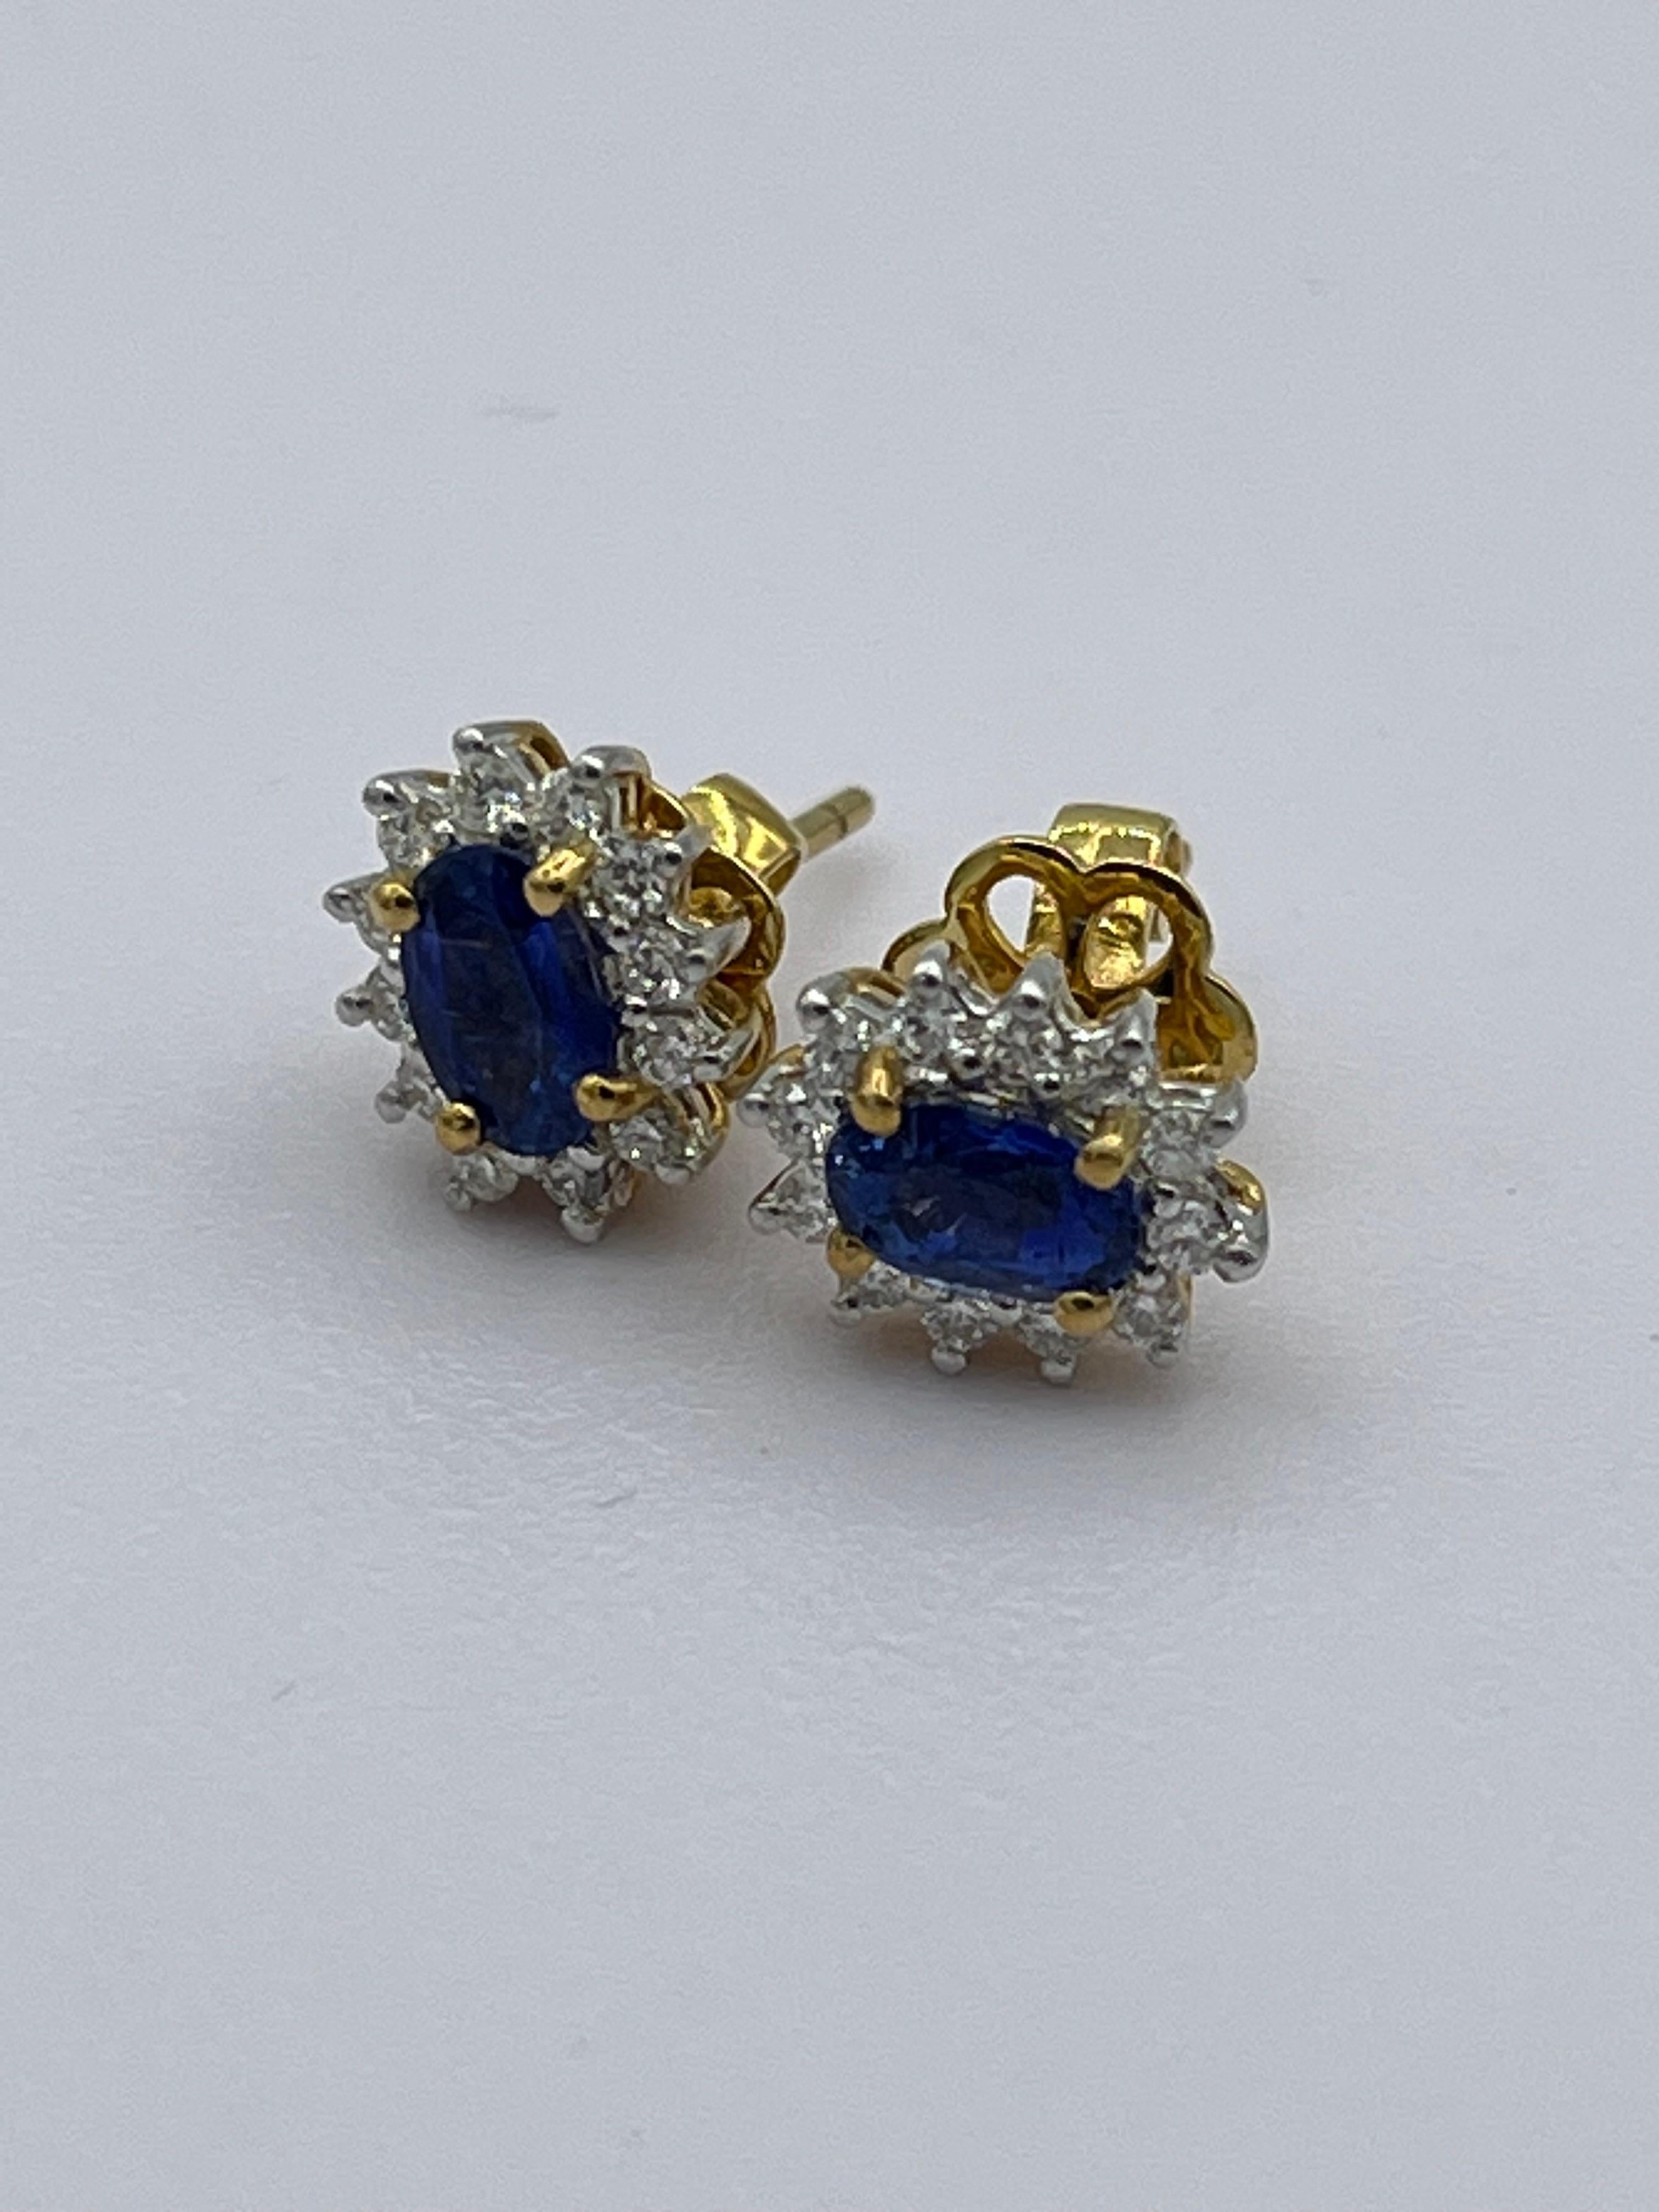 18 k yellow gold
1,24 ct sapphire
0,32 ct diamond
size ca. 10 x 8 mm 
3,8 grams
classical stud earrings for every age

